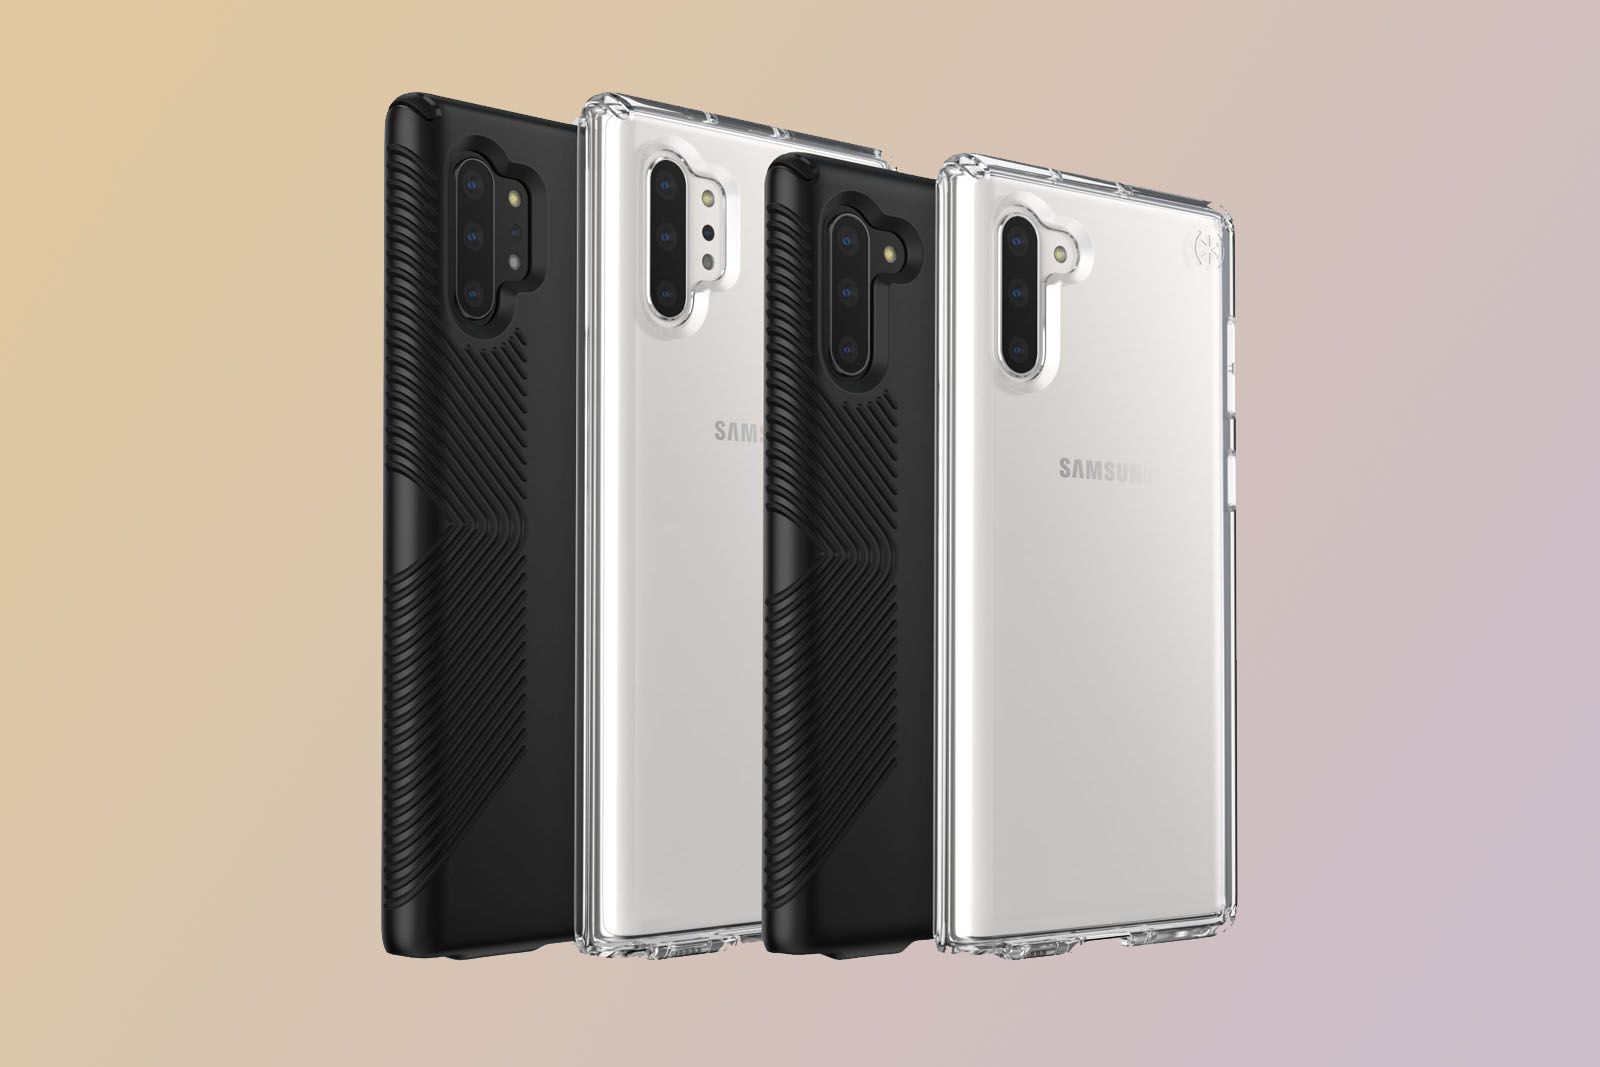 Best Note 10 And Note 10 Cases Protect Your New Samsung Phone image 5